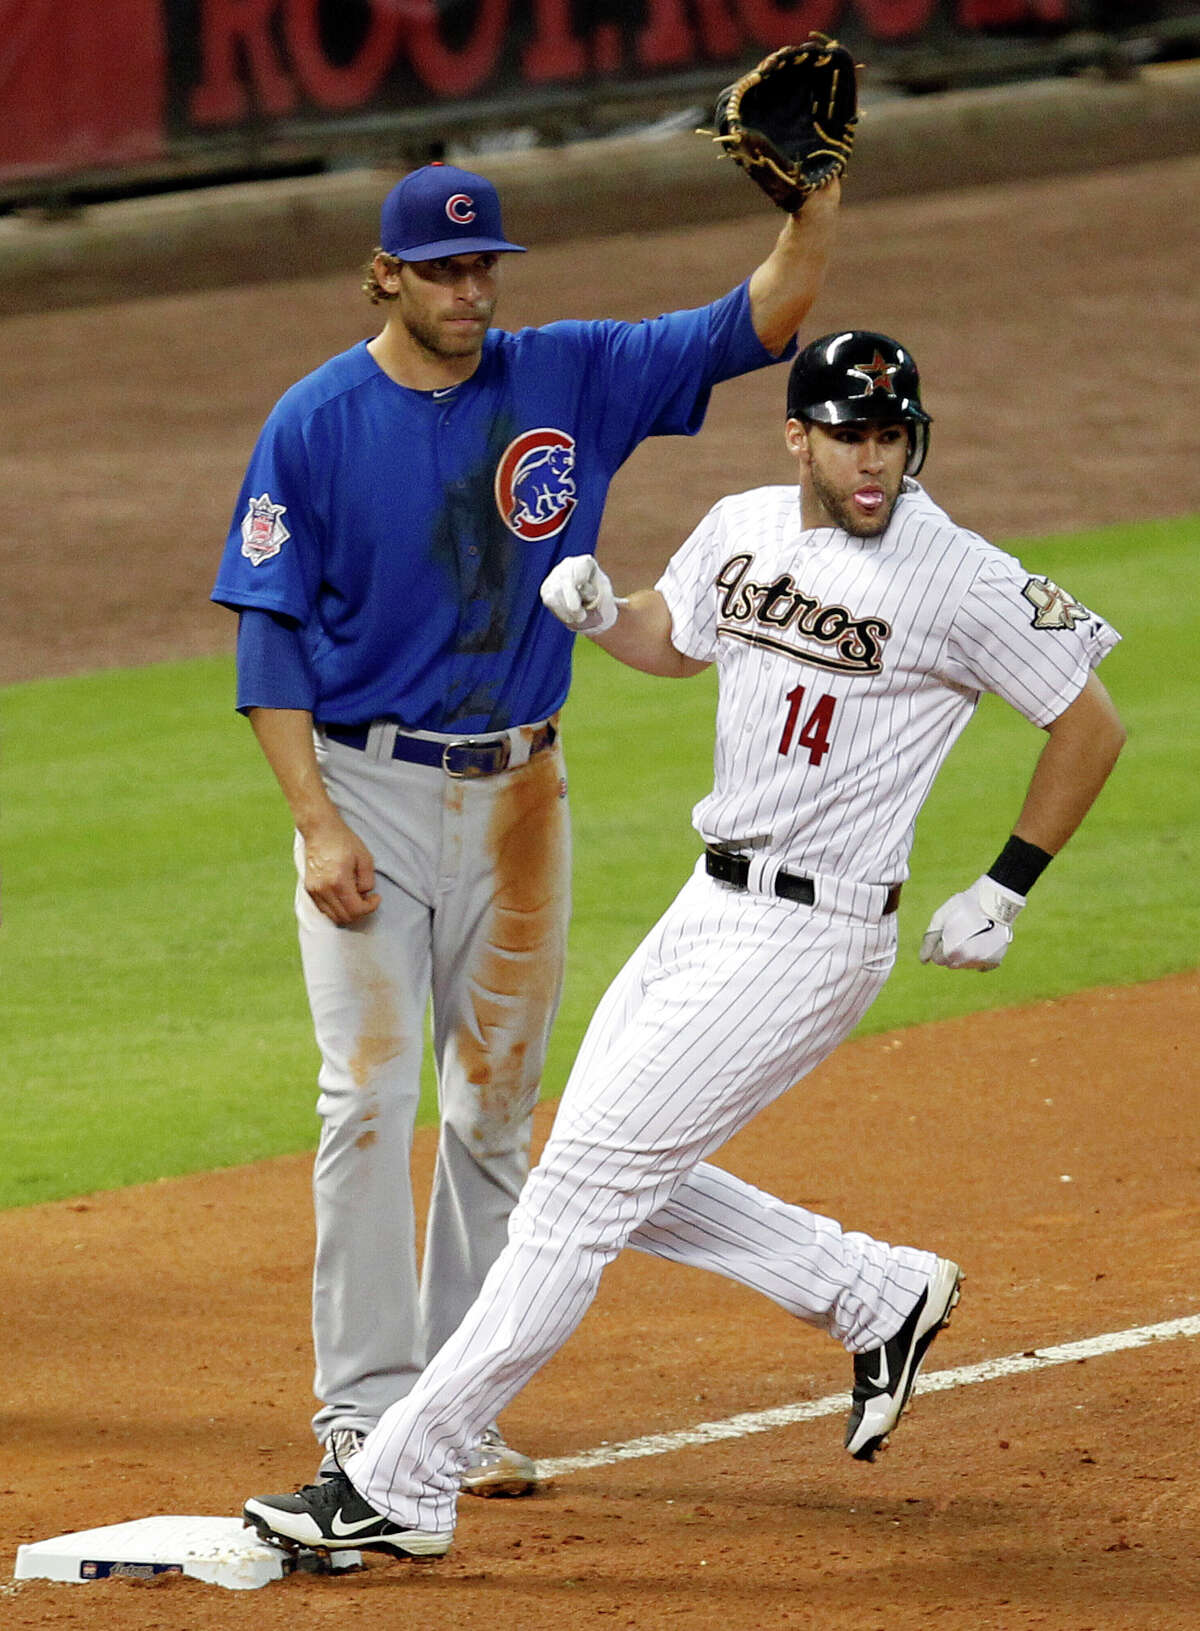 The Chicago Cubs third baseman Joe Mather, left, looks on as the Houston Astros left fielder J.D. Martinez stops at third base after hitting a triple during the fourth inning of MLB game action at Minute Maid Park Wednesday, May 23, 2012, in Houston.